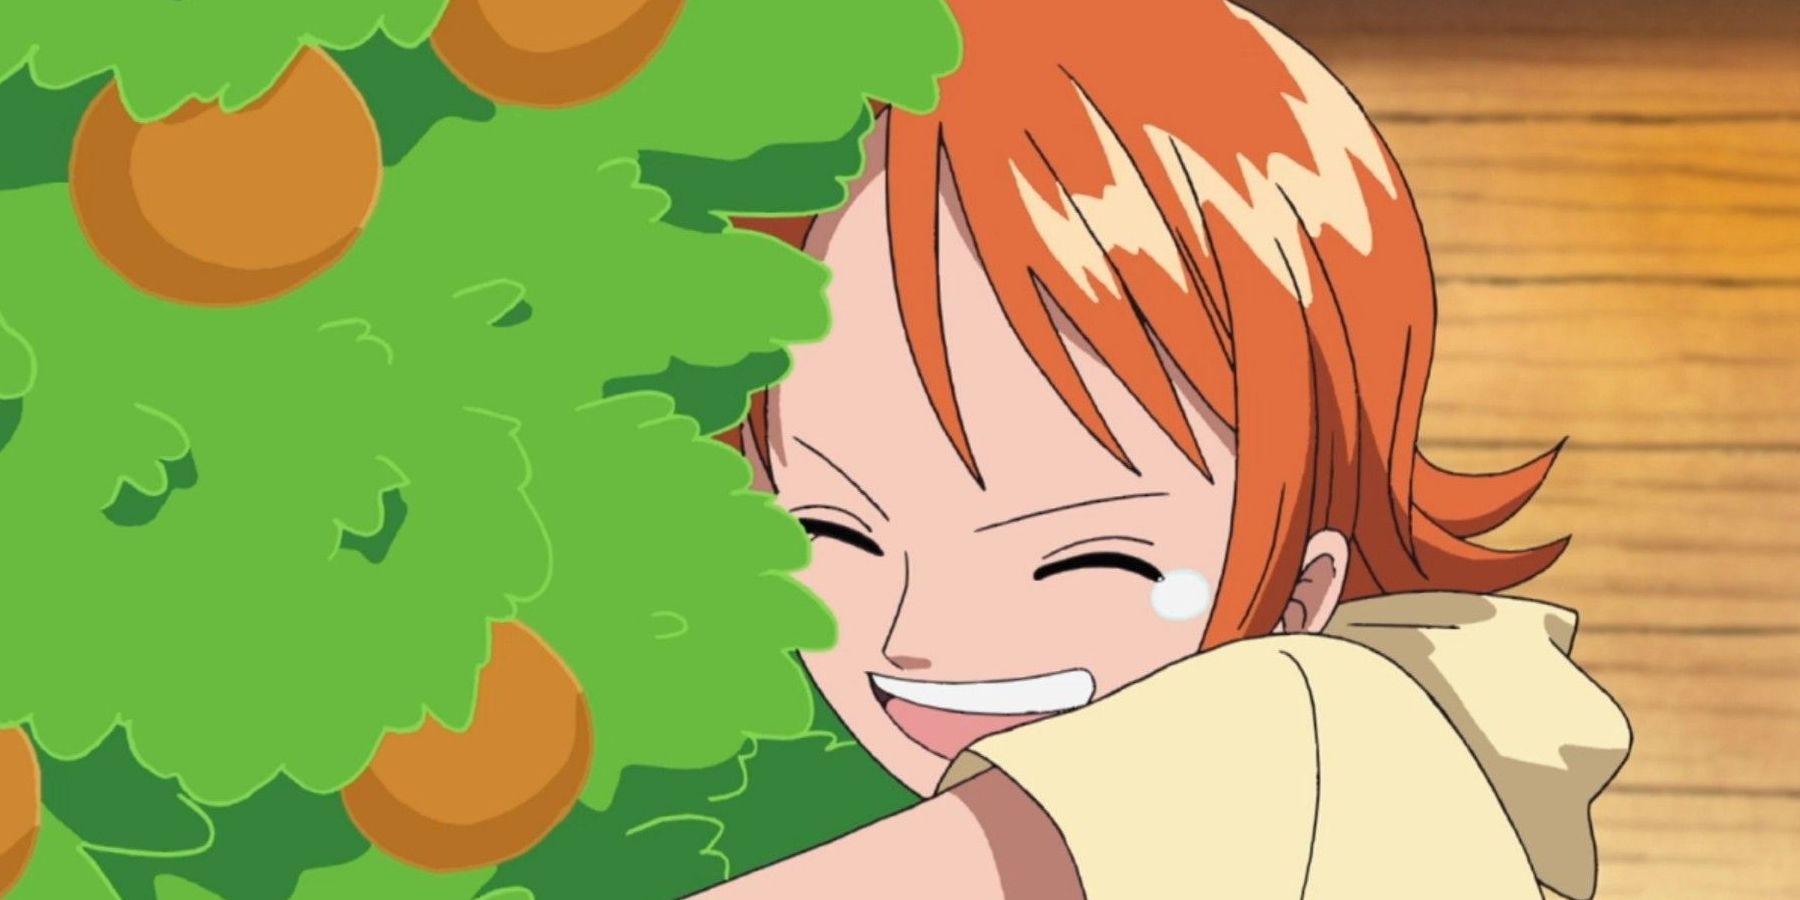 Nami and her tangerines